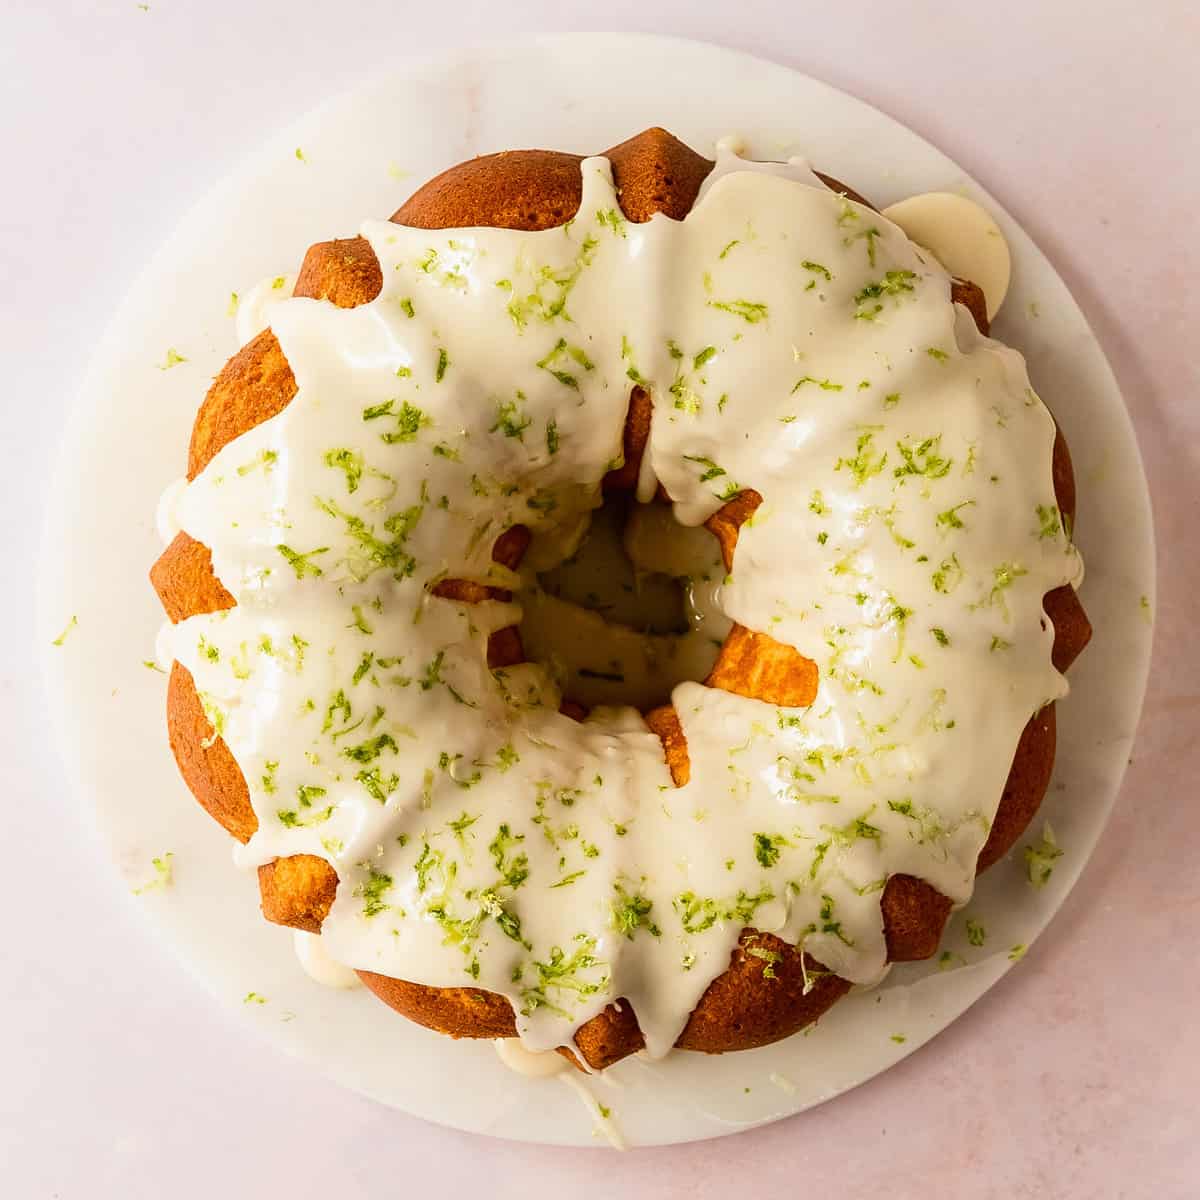  This key lime pound cake is a decadent, rich and buttery pound cake filled with key lime flavor. Top with this lime pound cake with a deliciously tart and sweet key lime glaze. Enjoy this easy to make, tropical twist on the classic southern pound cake for breakfast, brunch or dessert. 